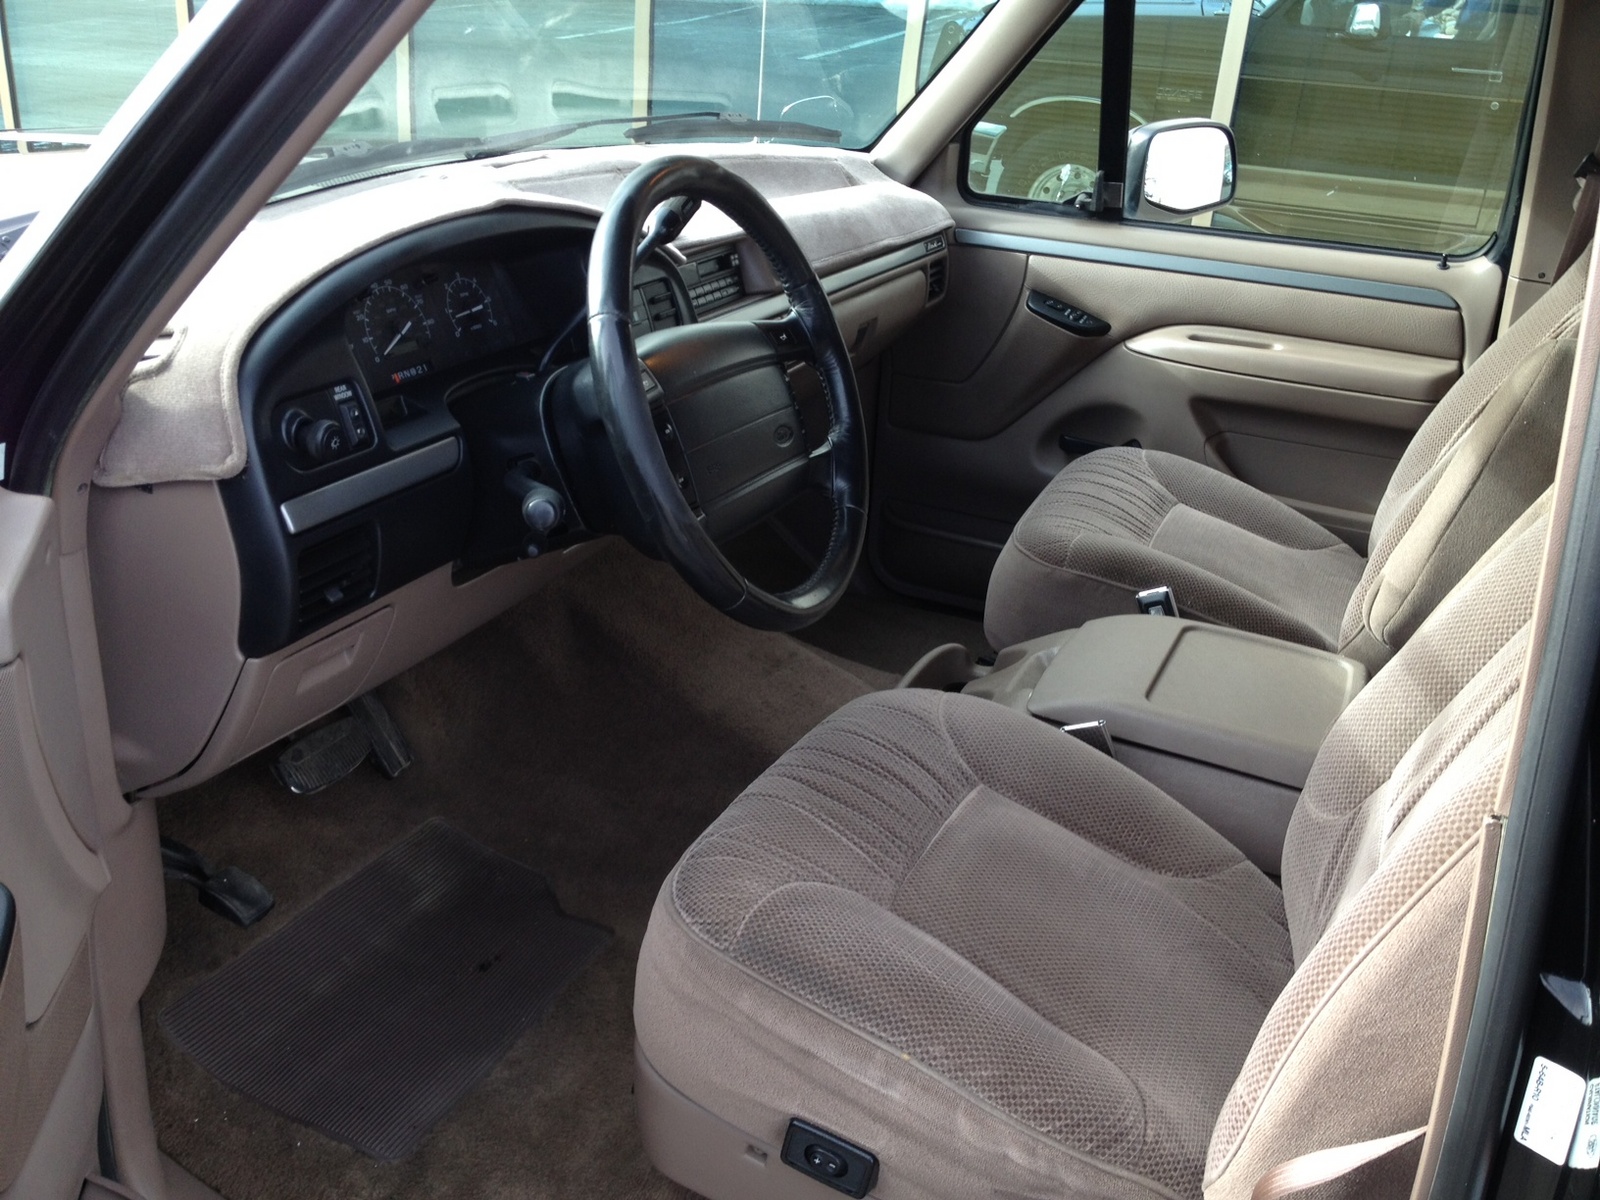 1995 Ford bronco interior pictures #7